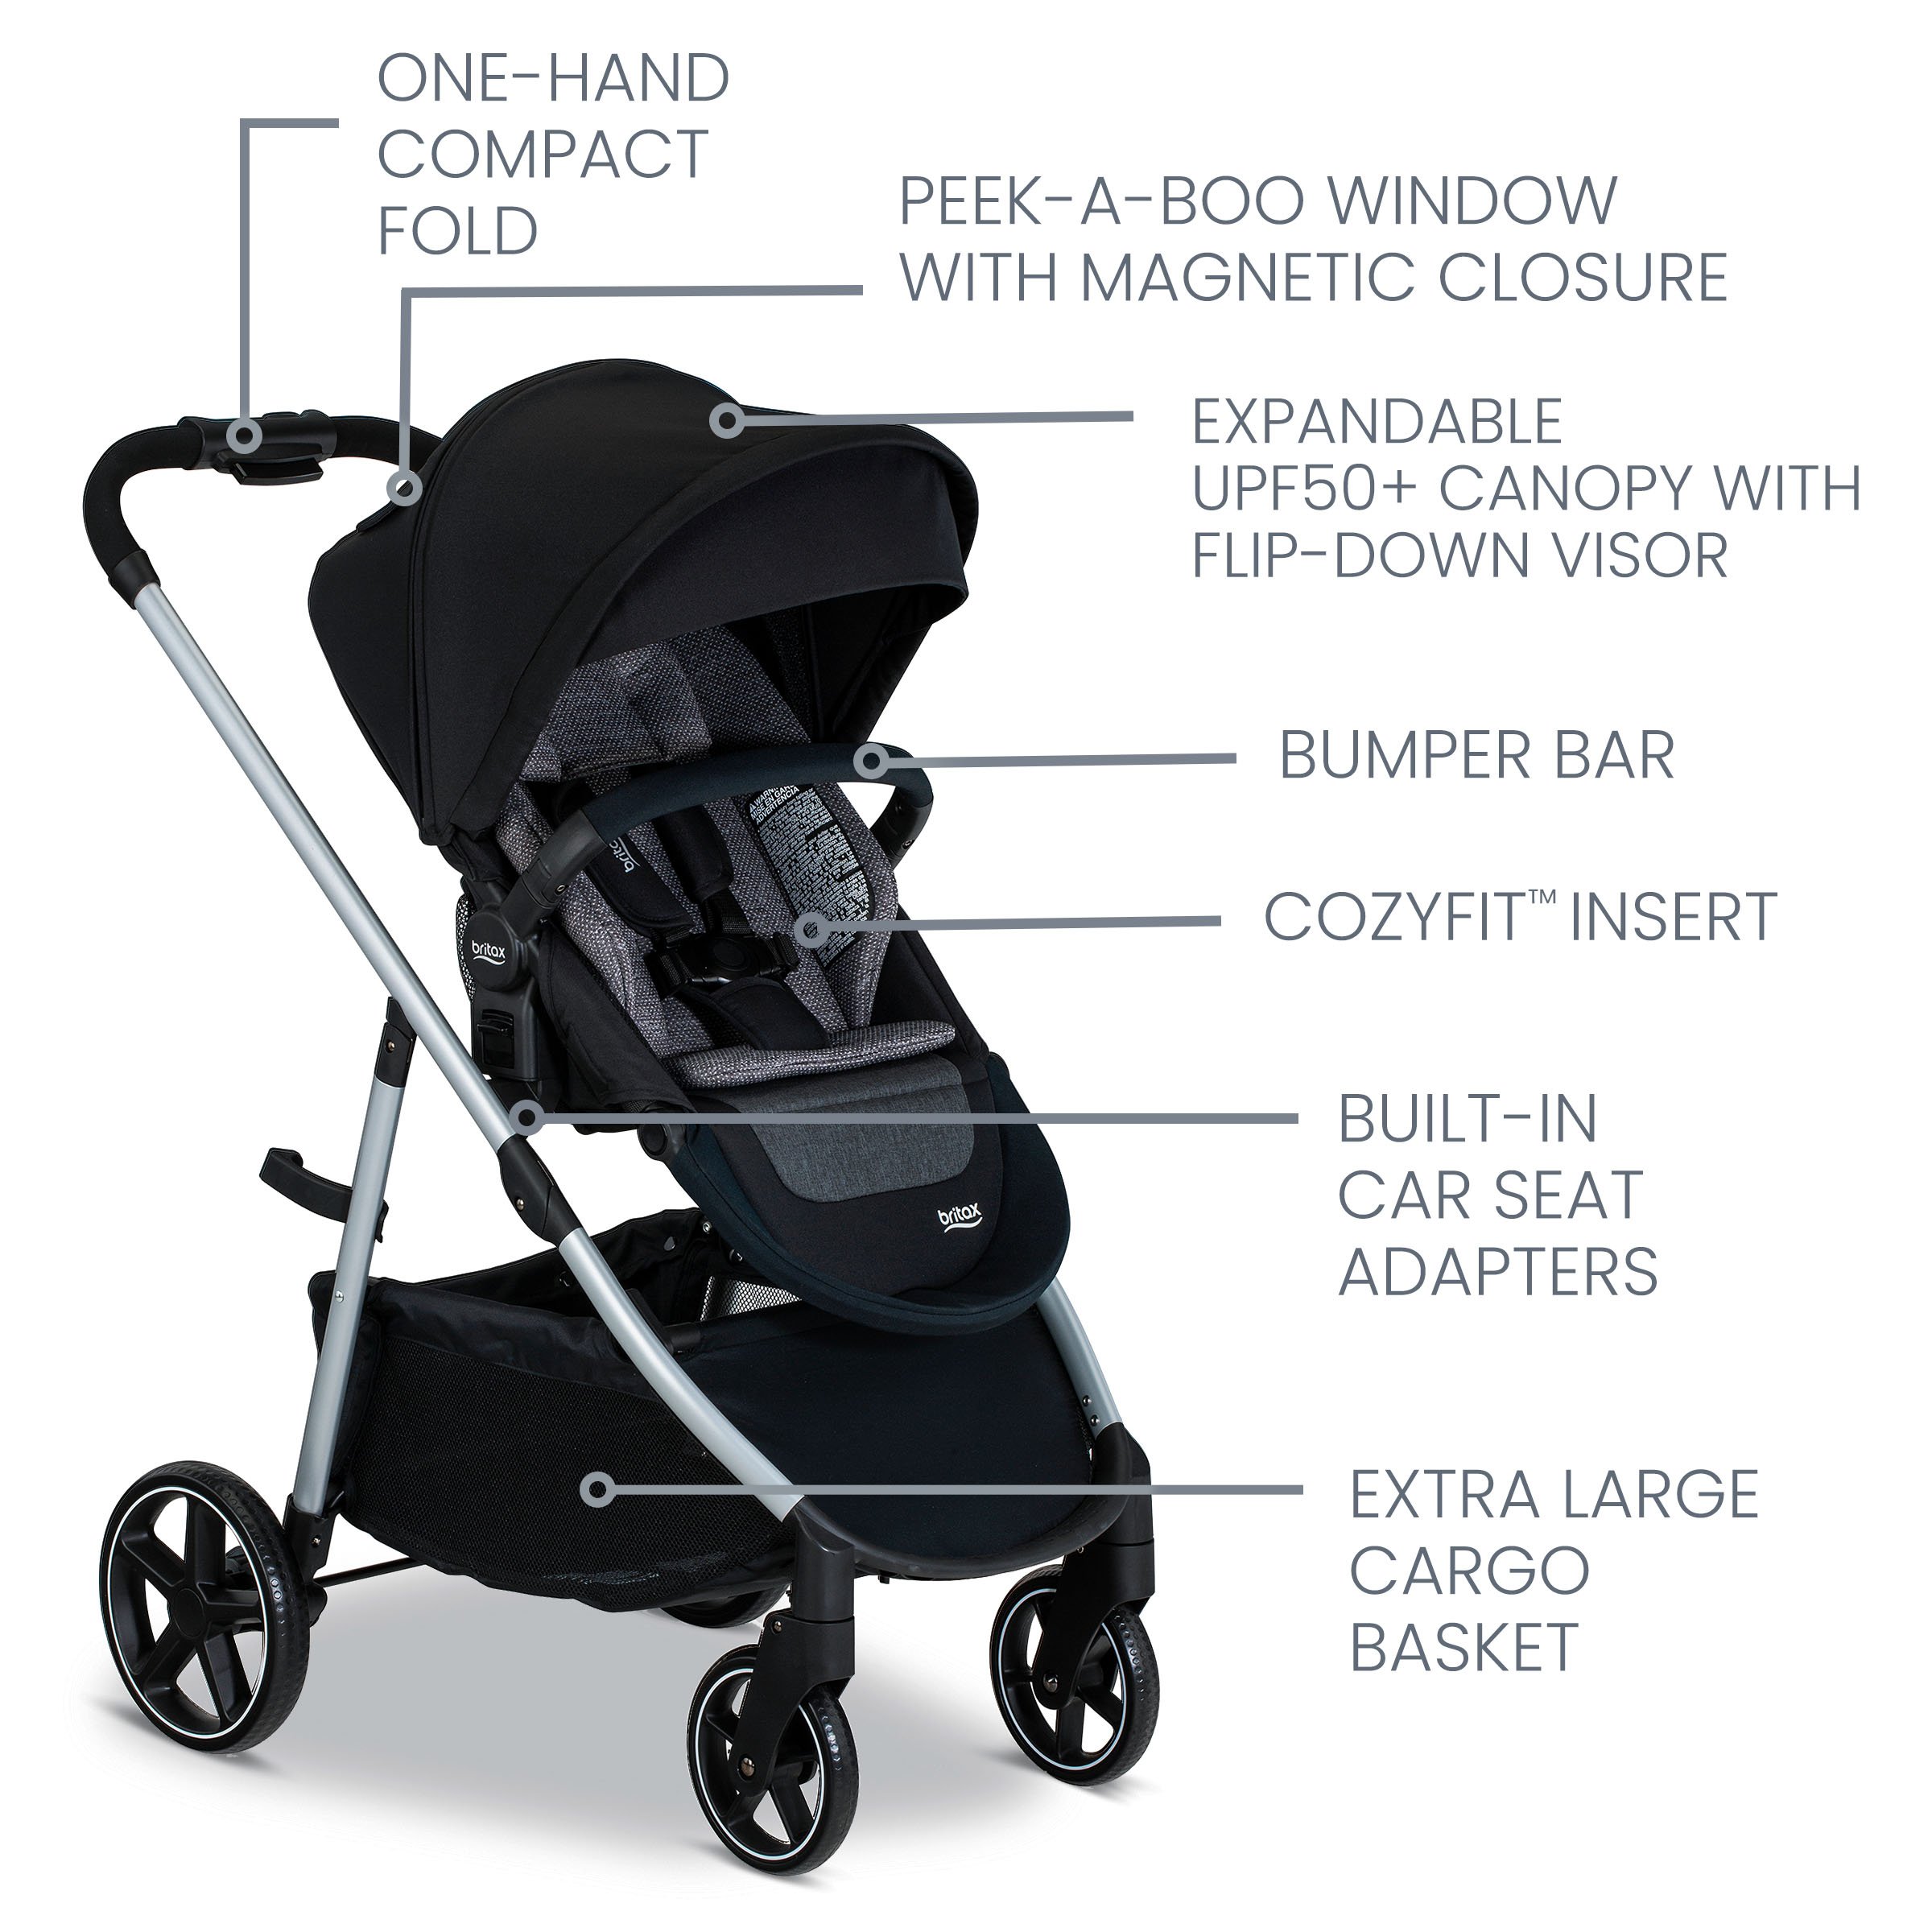 Stroller Features labeled out